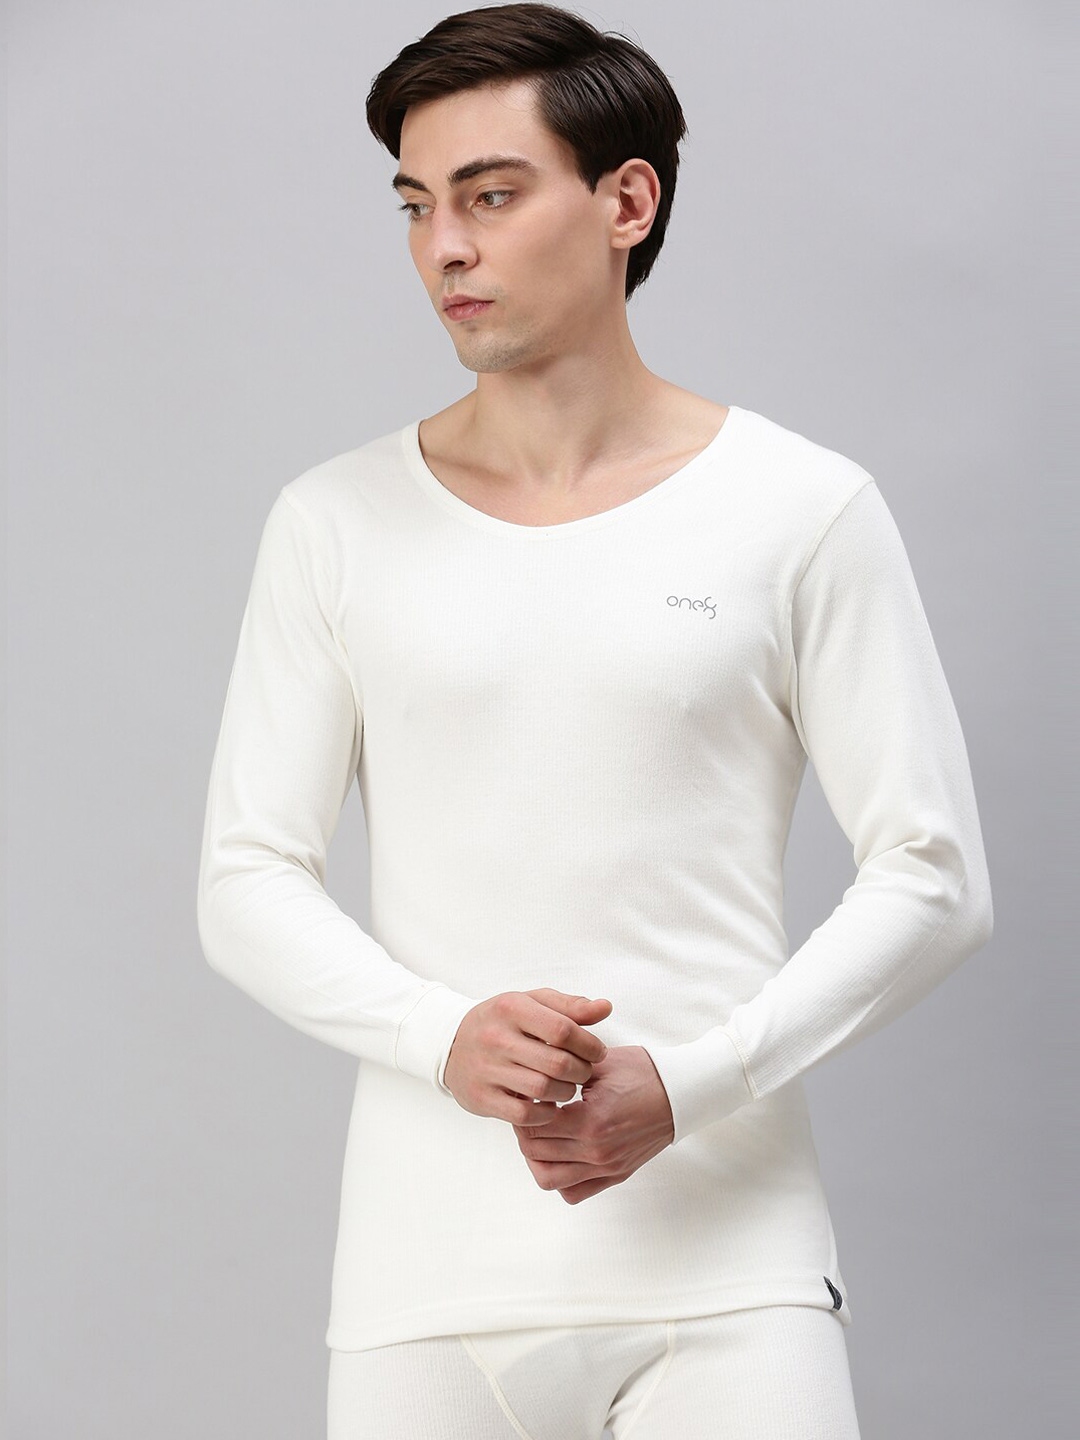 Buy BODYCARE Women Beige Solid Cotton Blend Thermal Tops Online at